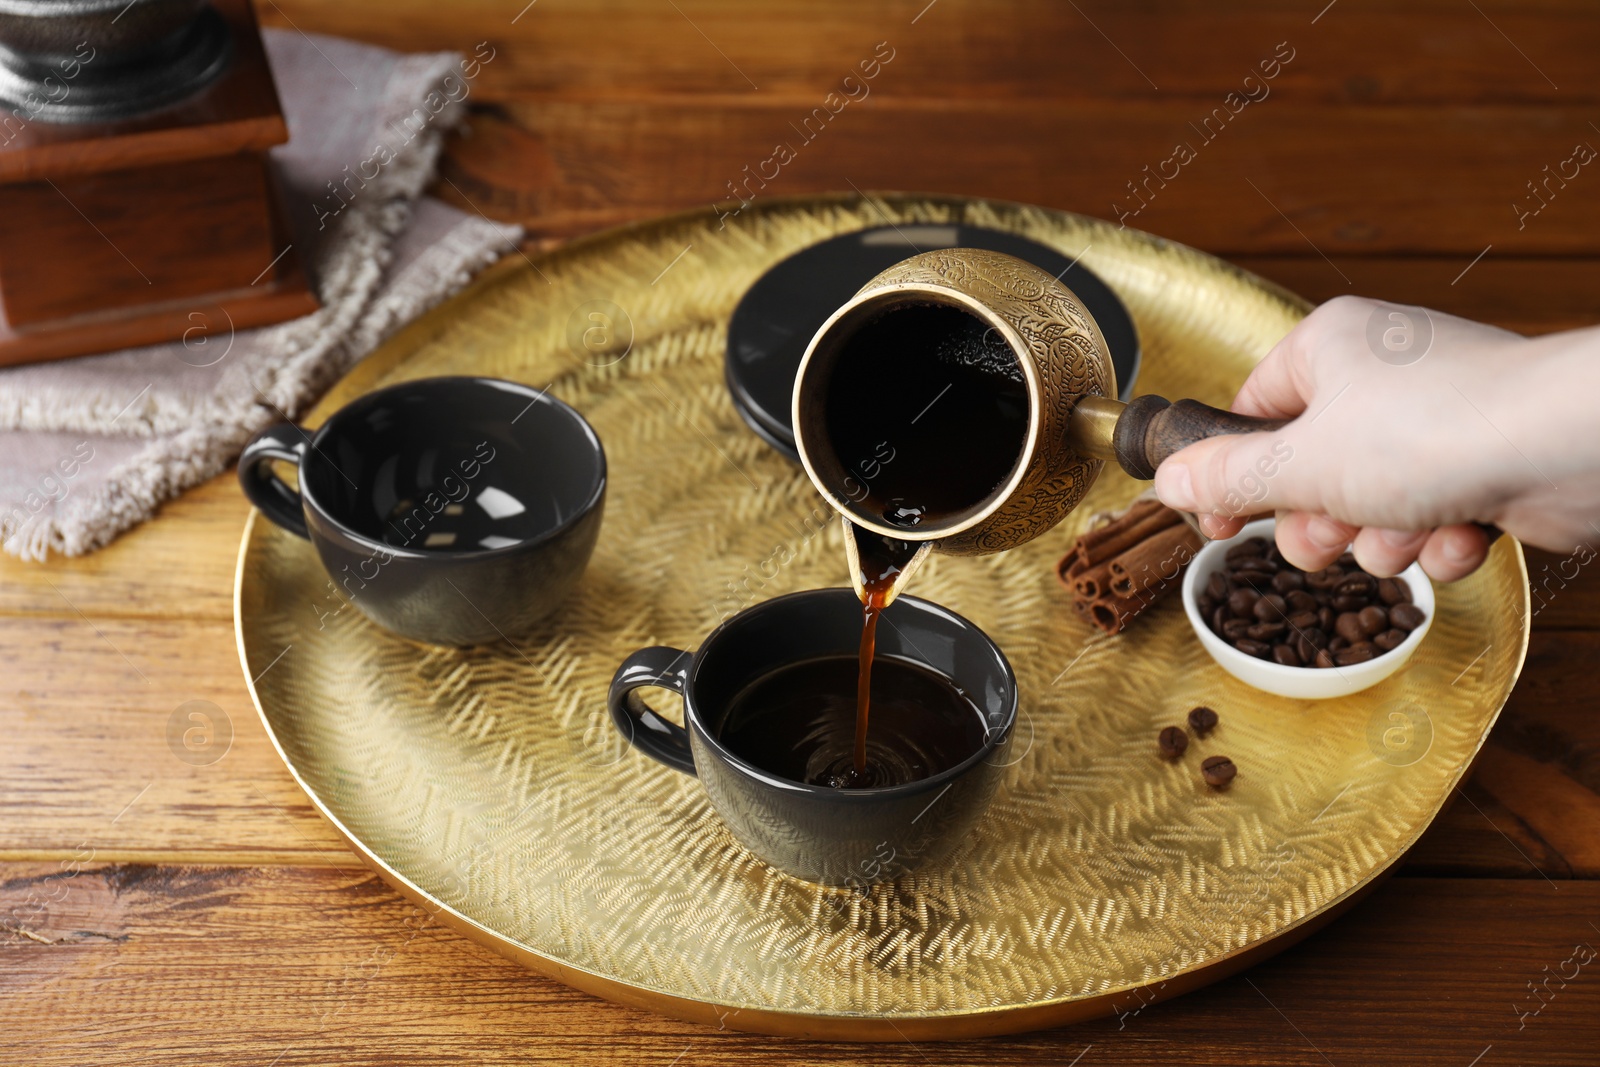 Photo of Turkish coffee. Woman pouring brewed beverage from cezve into cup at wooden table, closeup